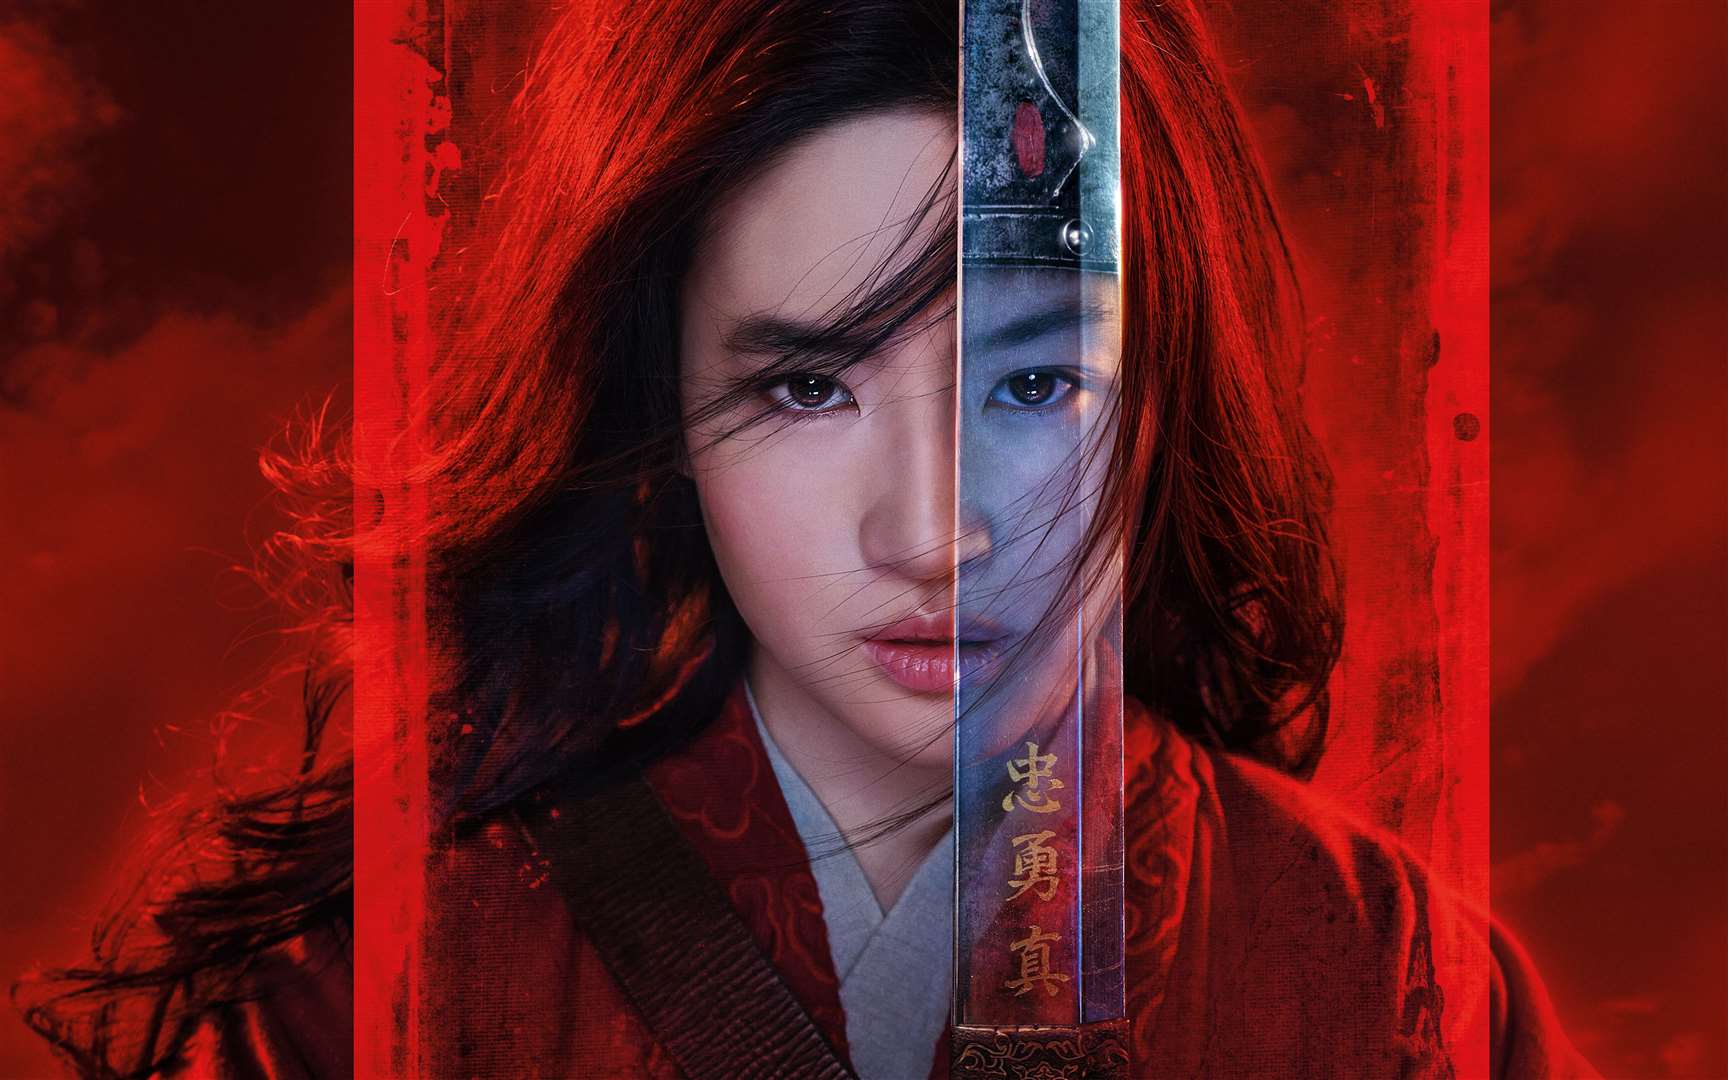 Mulan will be available to purchase on Disney+ from September 4